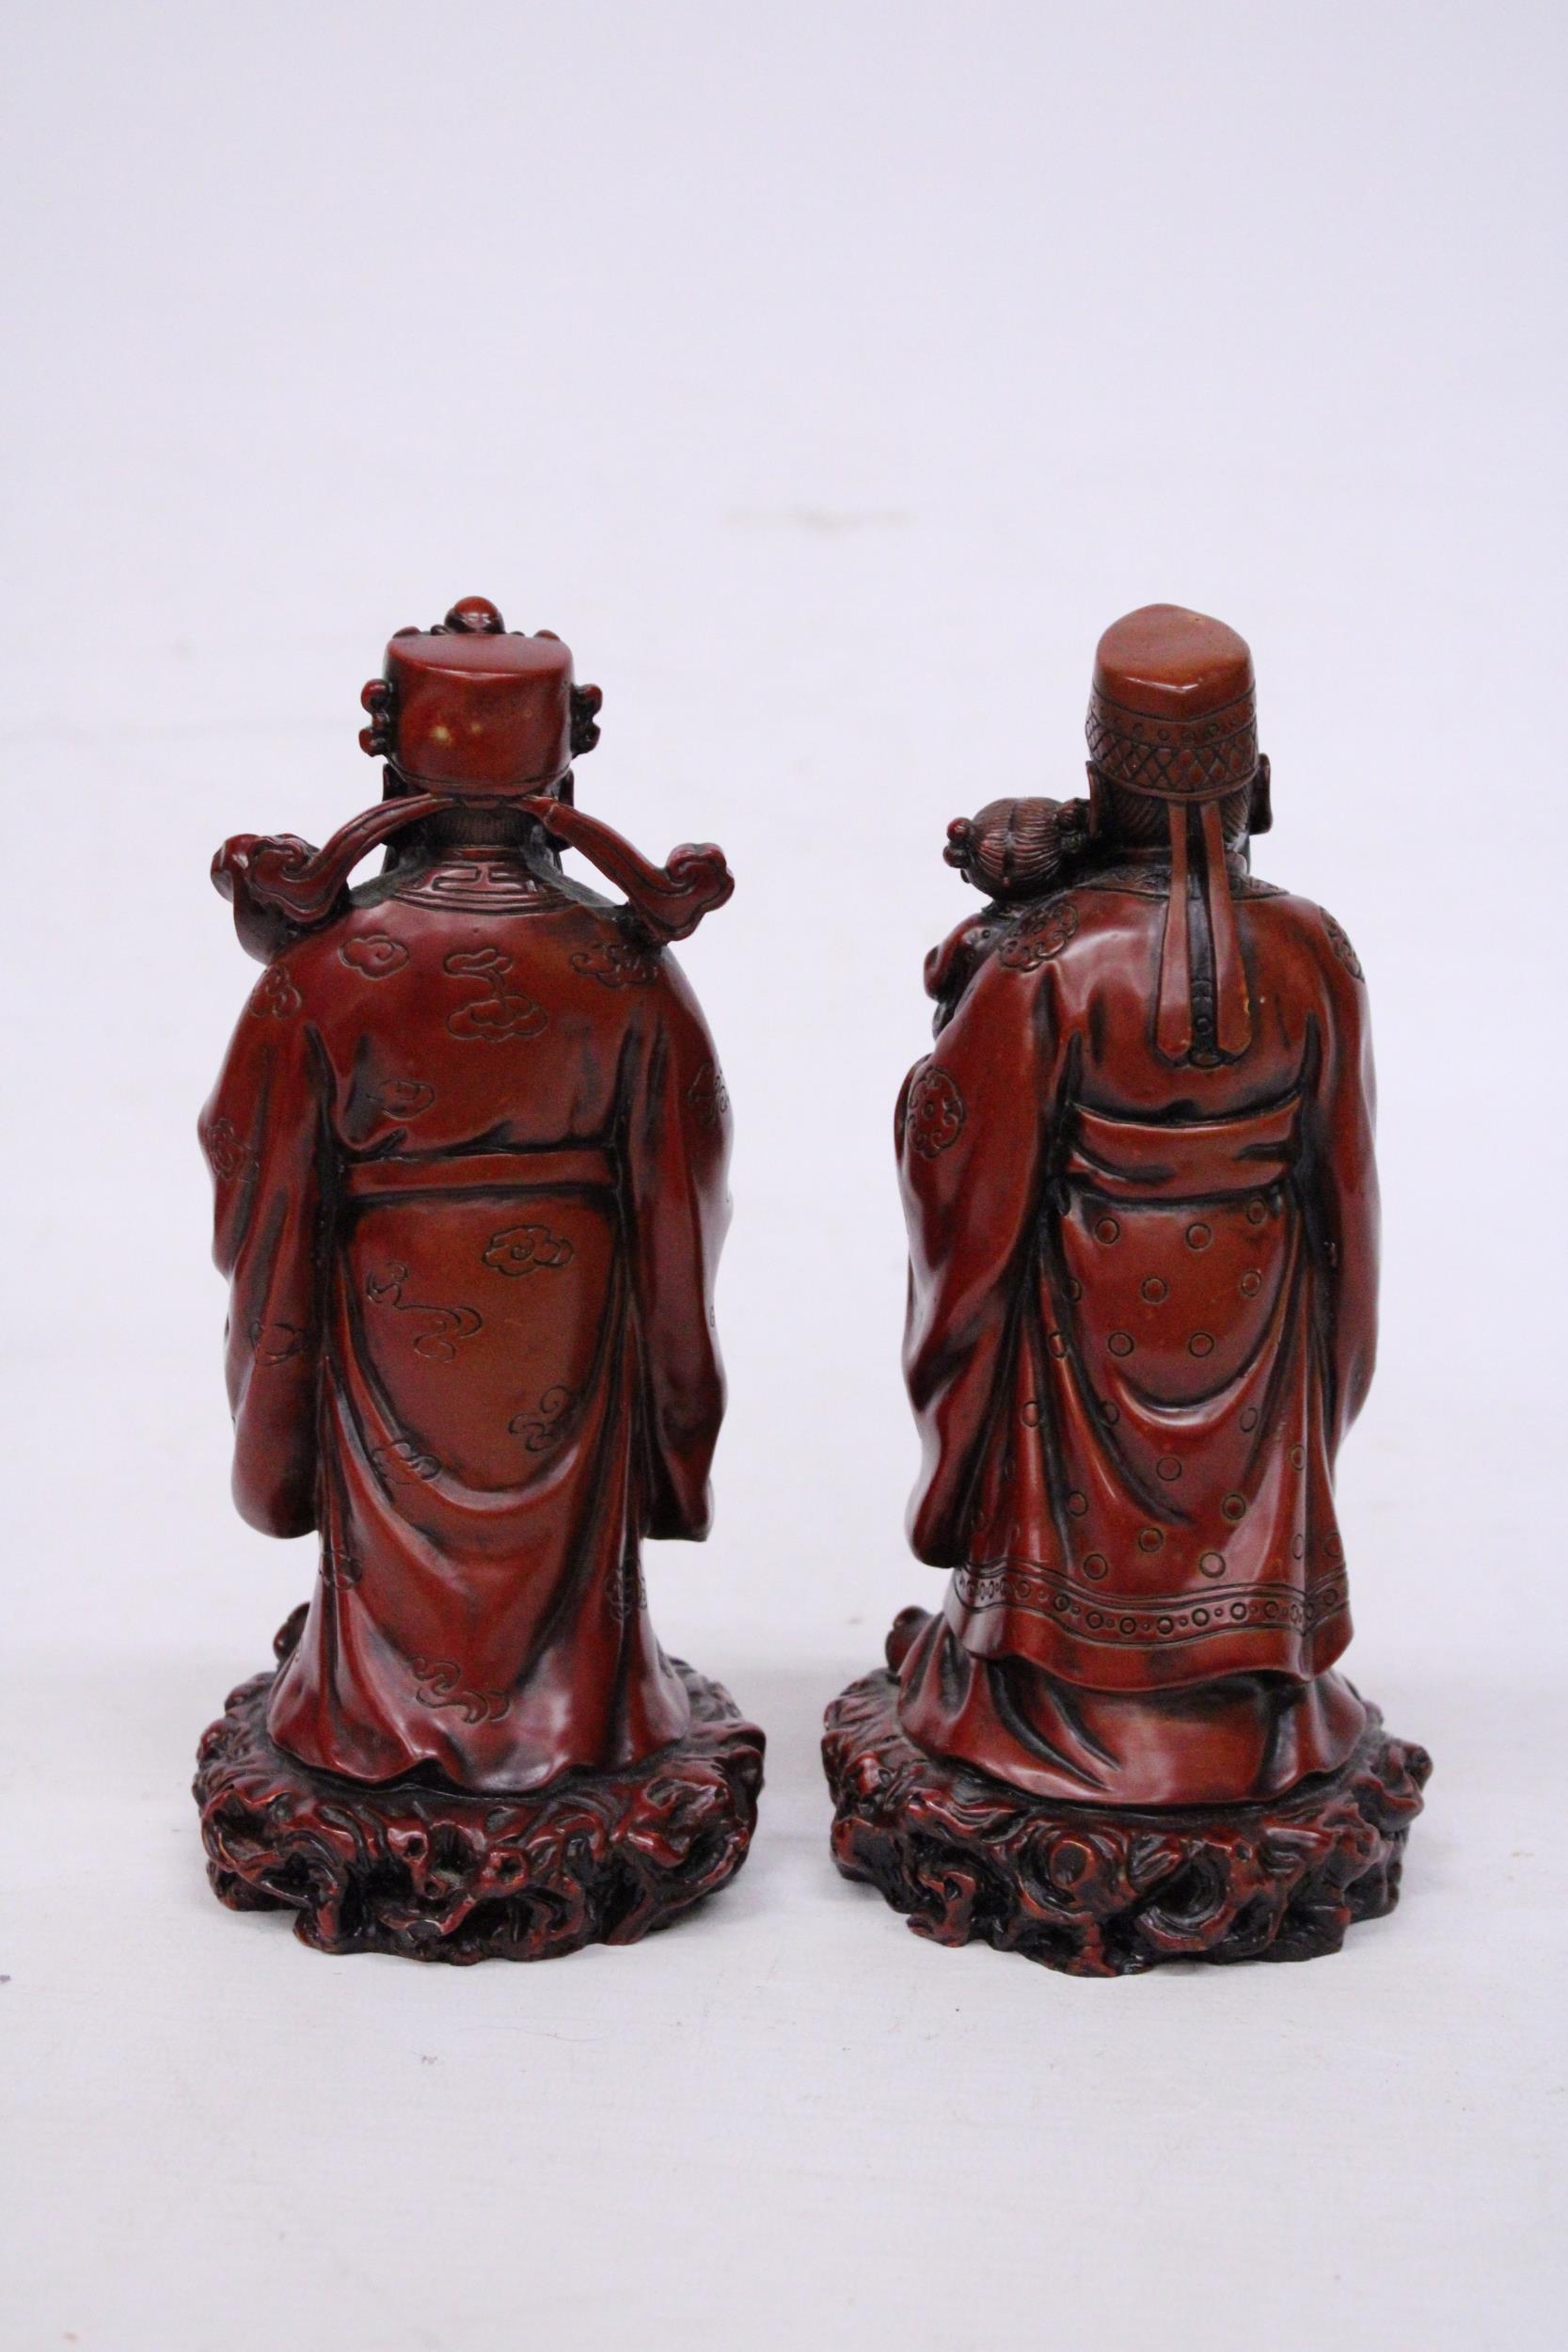 TWO HEAVY RED RESIN MANDARIN FIGURES 9 INCH (H) - Image 3 of 6